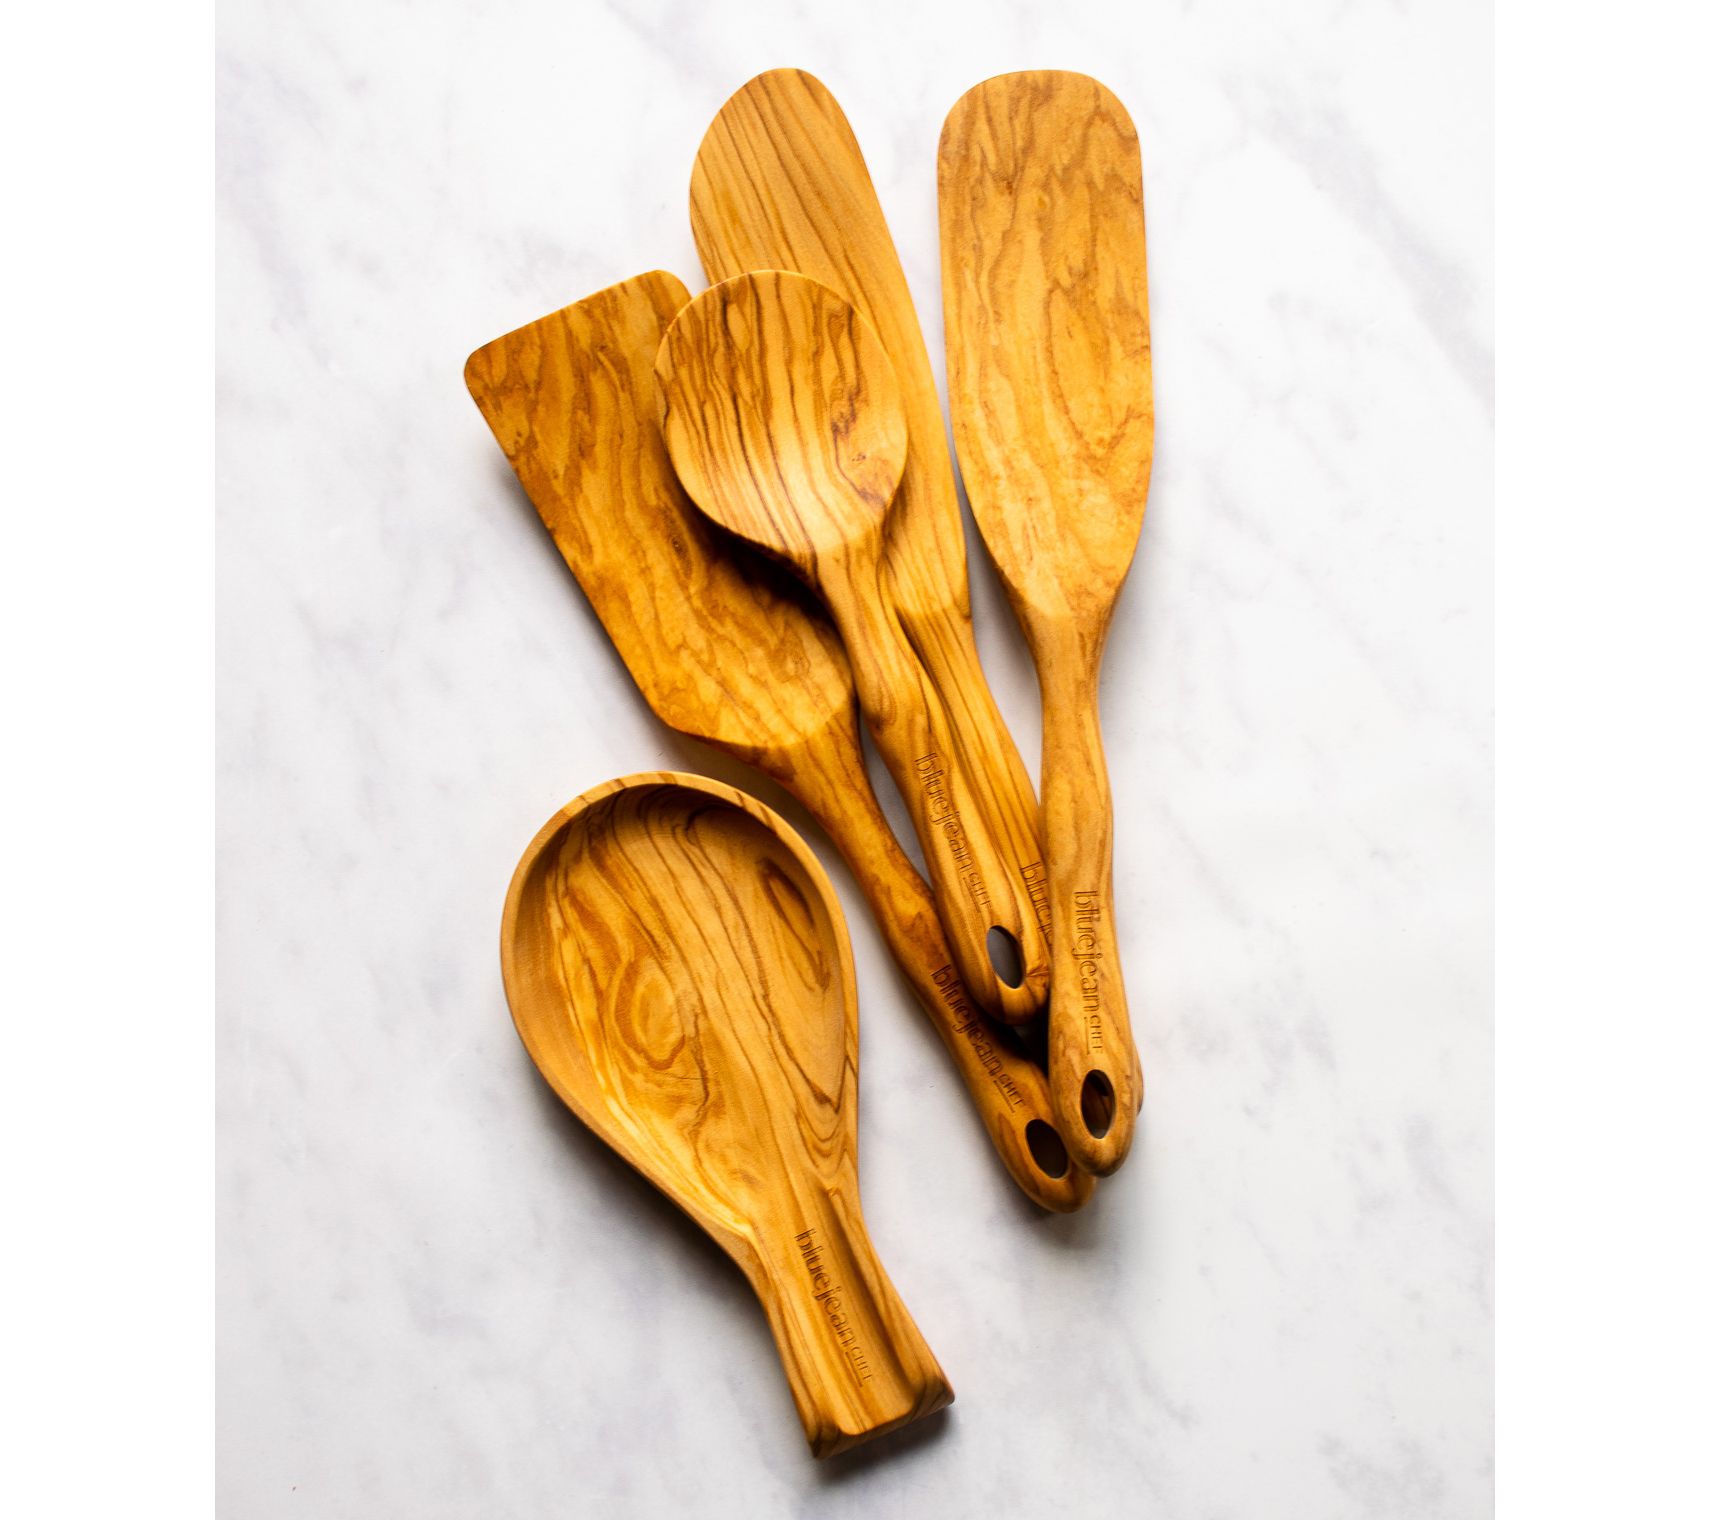 Artisan-Crafted Olive Wood Kitchen Utensils - Aesthetic